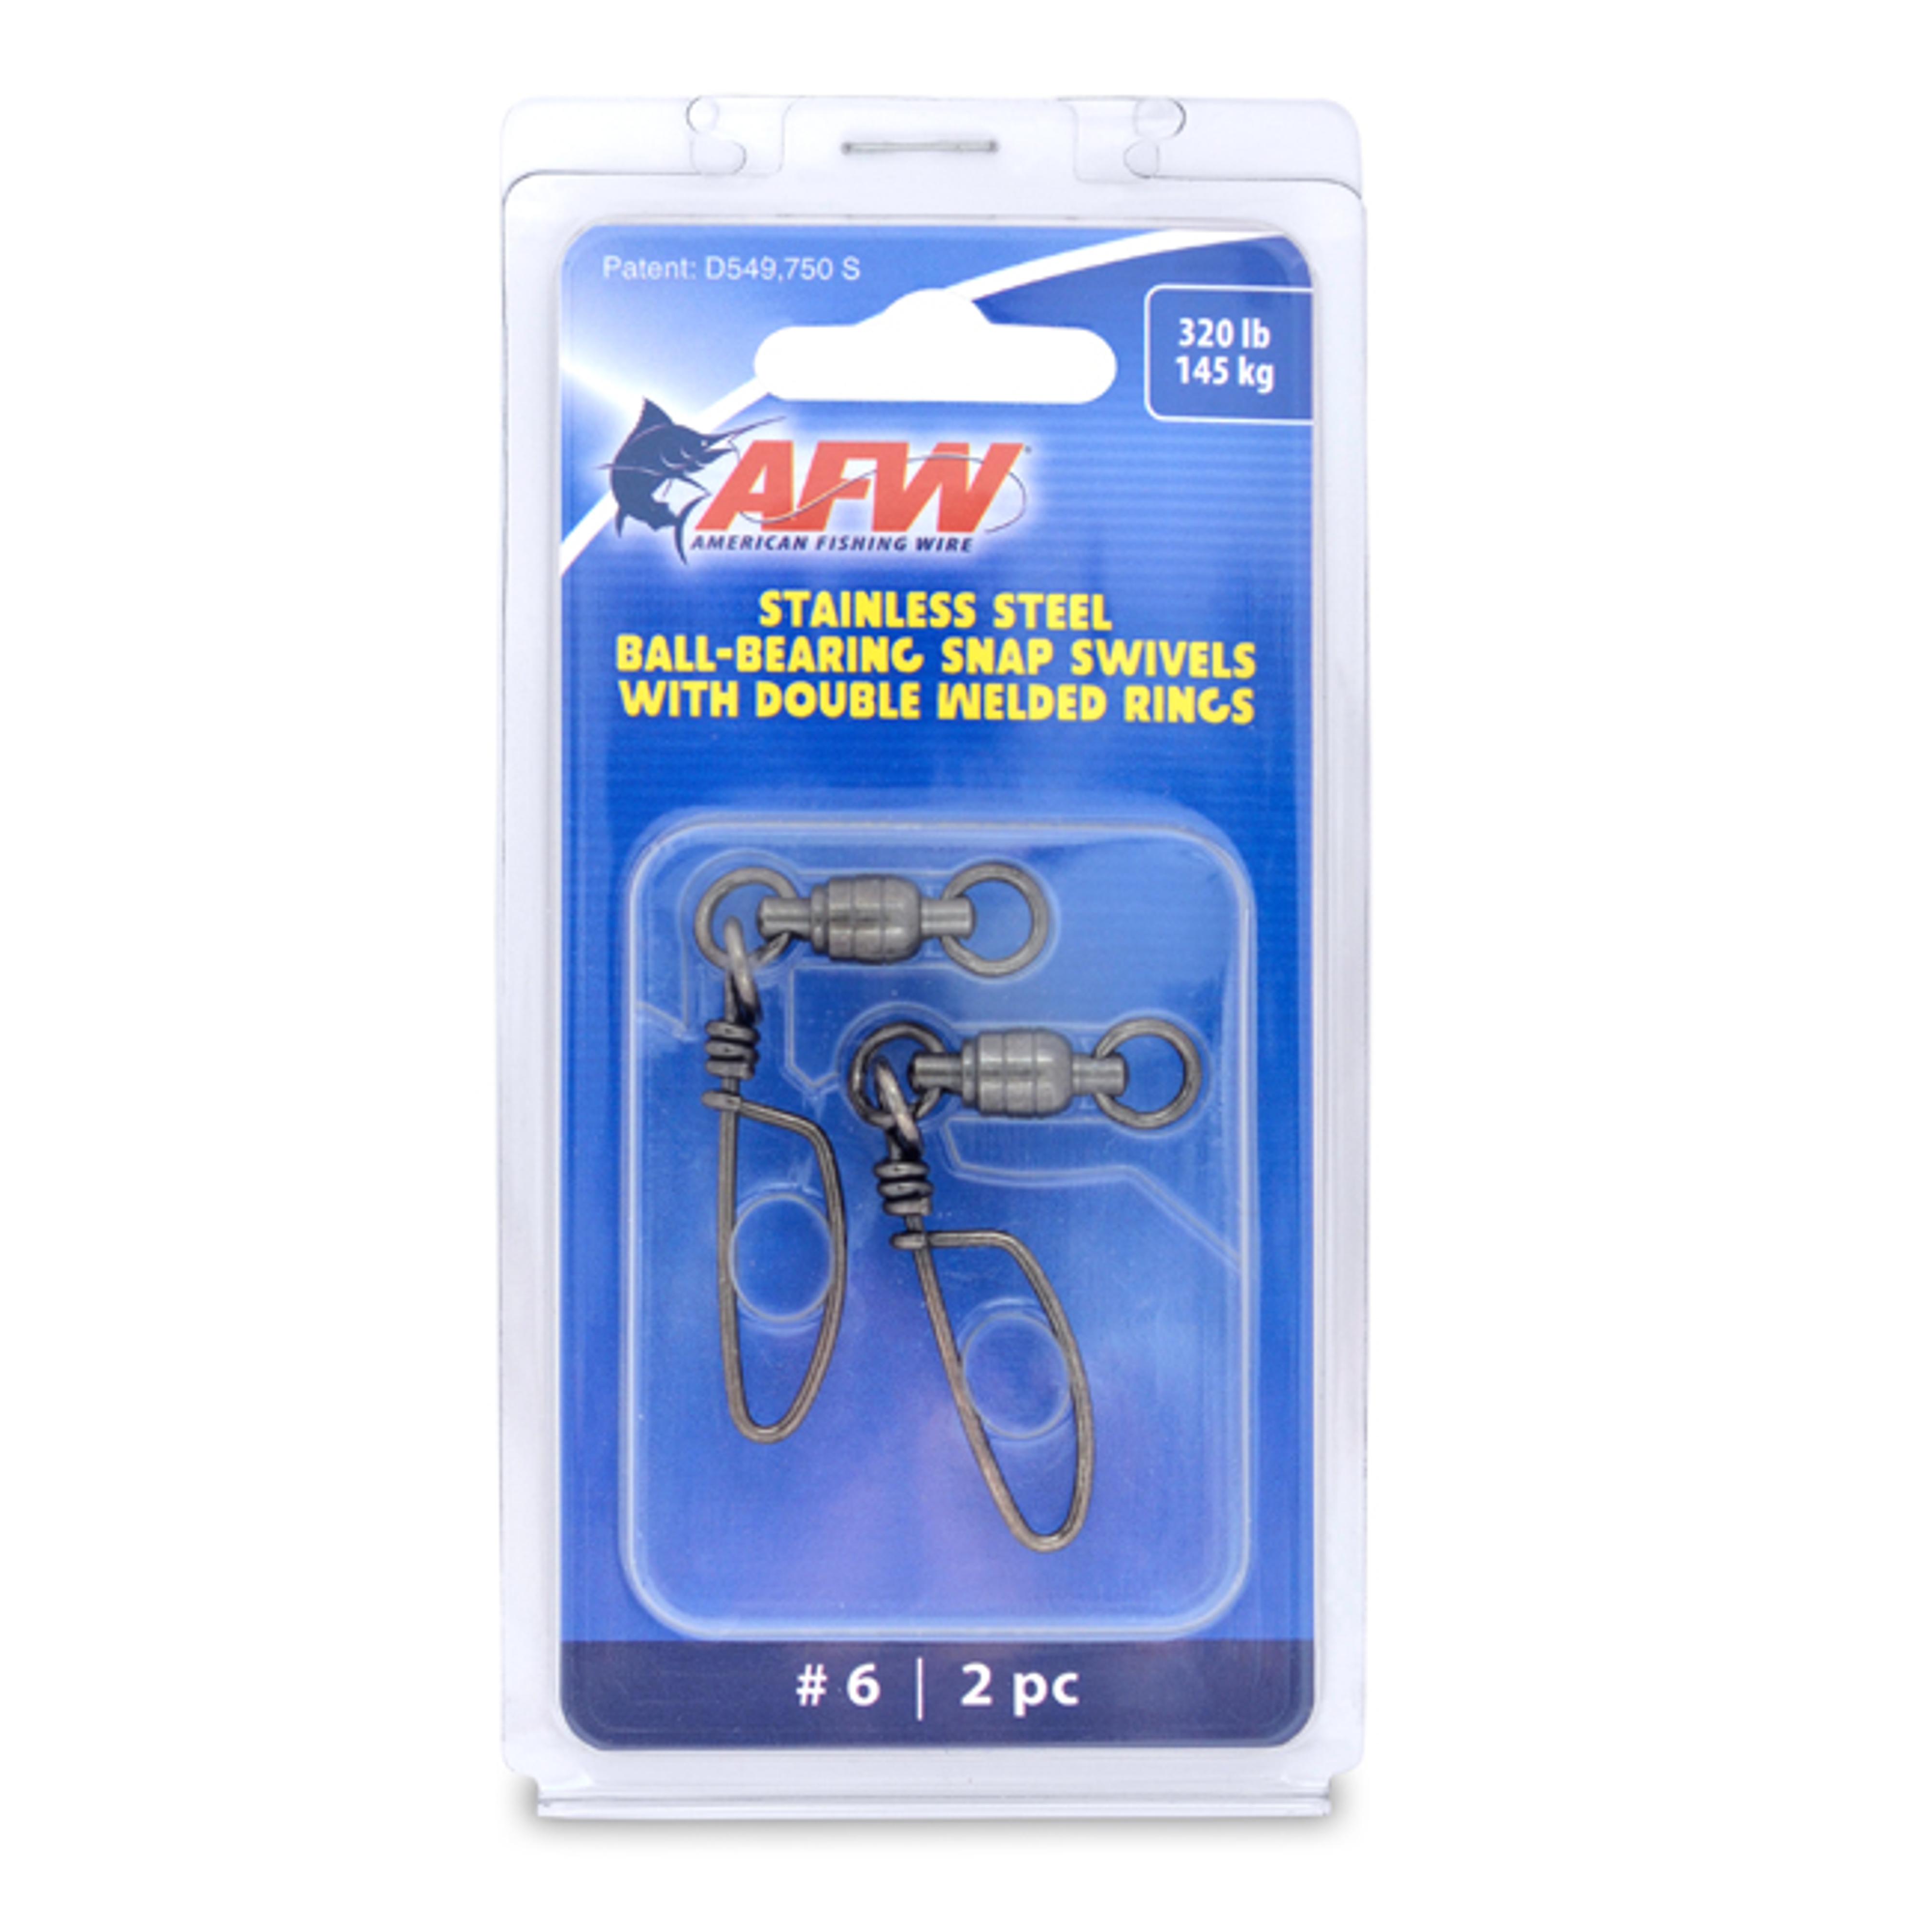 150 Pieces Fishing Snaps Swivels Set, Includes 100 Pieces Decoy Cord Crimps  and 50 Pieces Ball Bearing Swivels with Stainless Steel Coatlock Snap